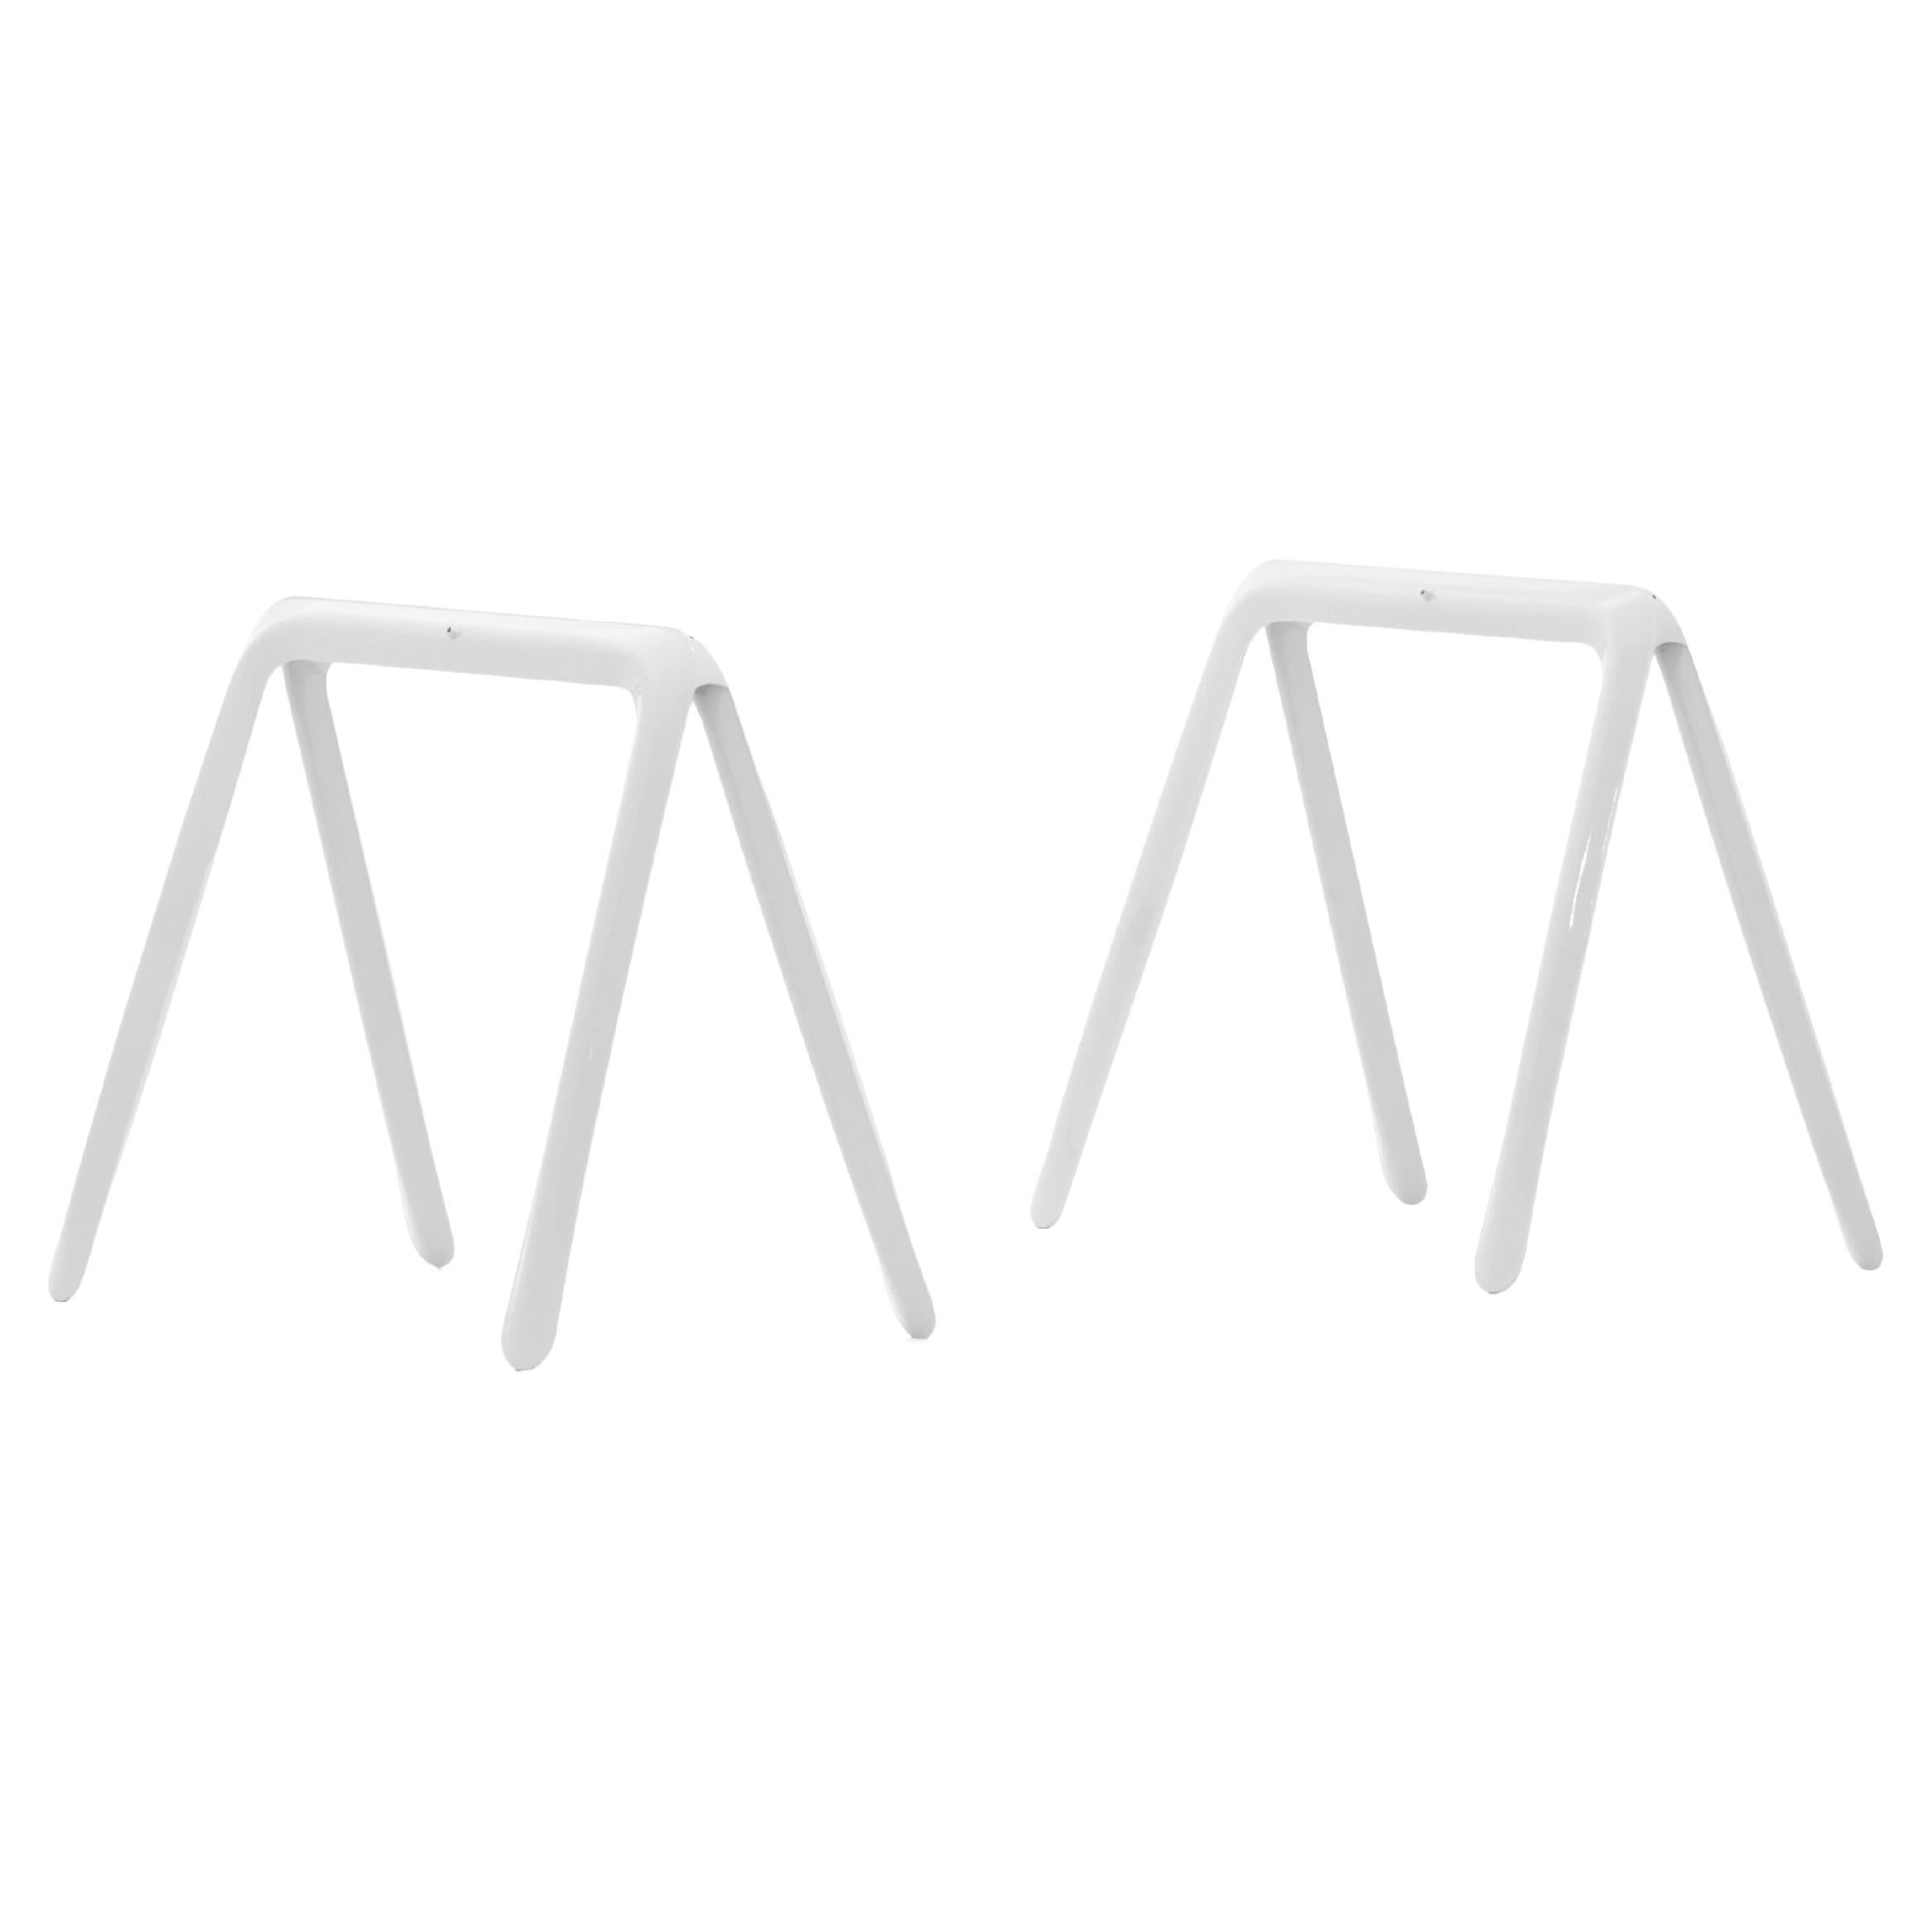 Pair of Koza Trestles in White Glossy by Zieta For Sale